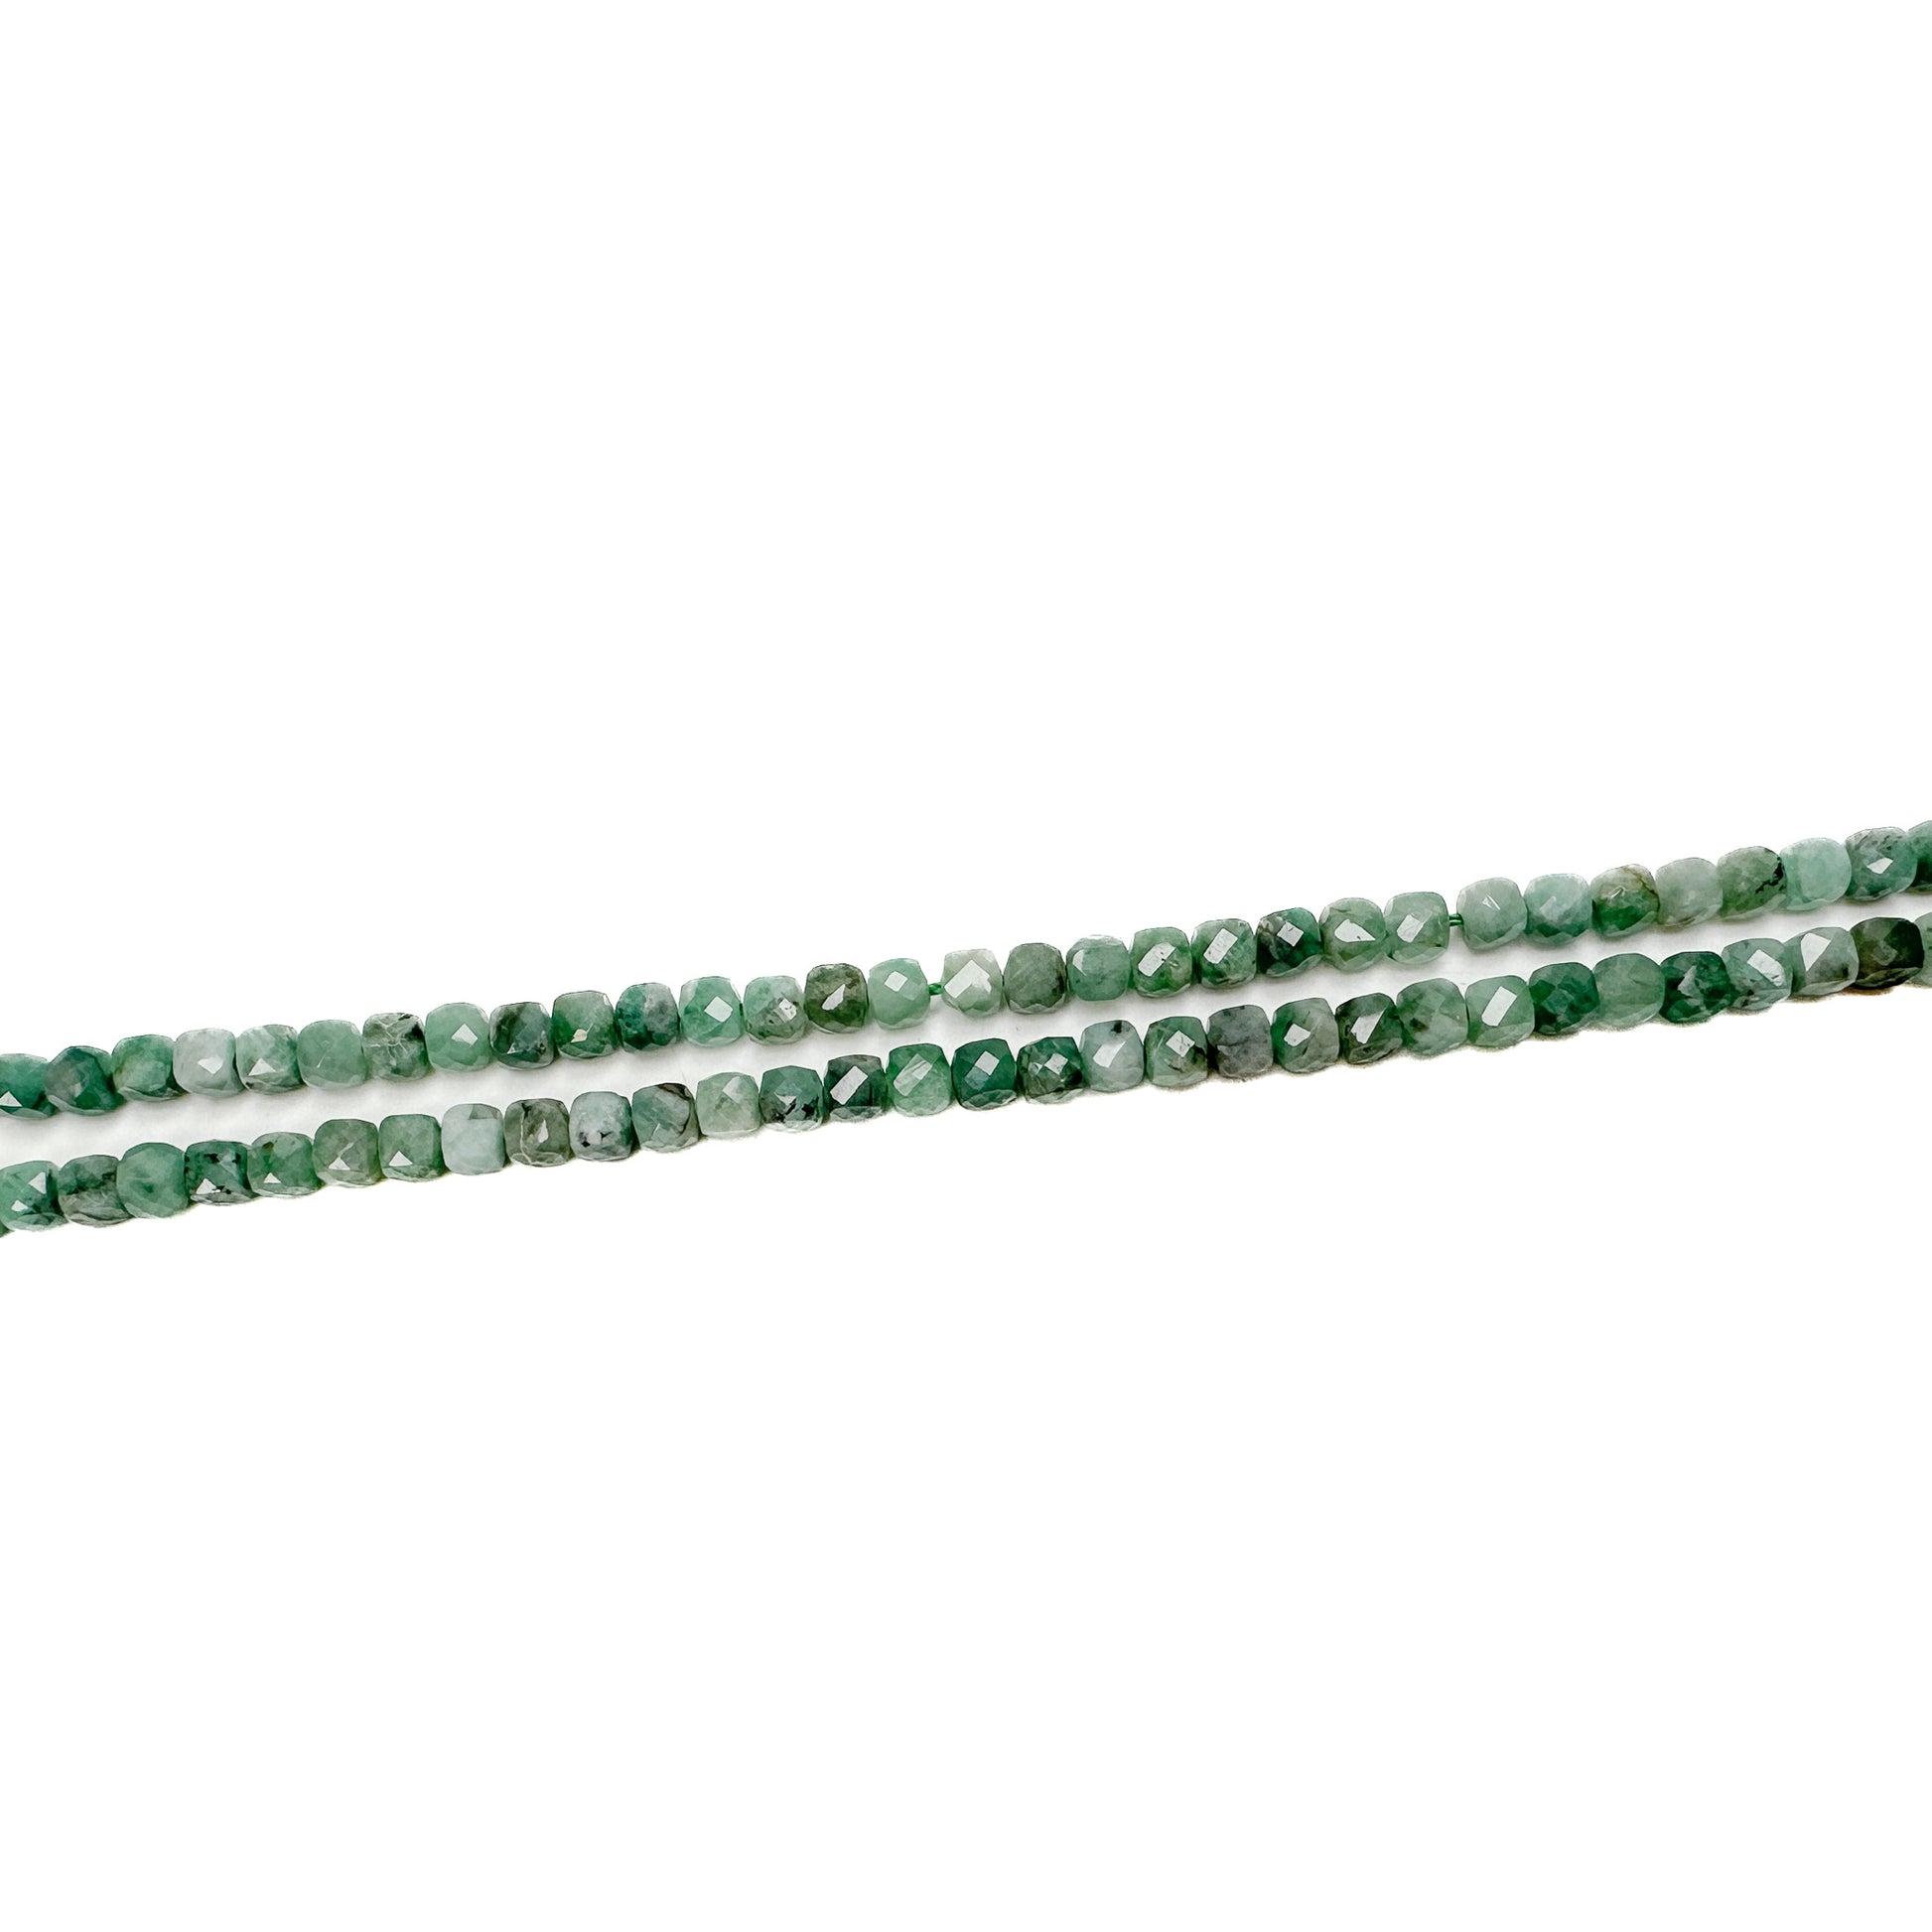 Emerald 4mm Faceted Cube Bead - 3" MINI Strand-The Bead Gallery Honolulu